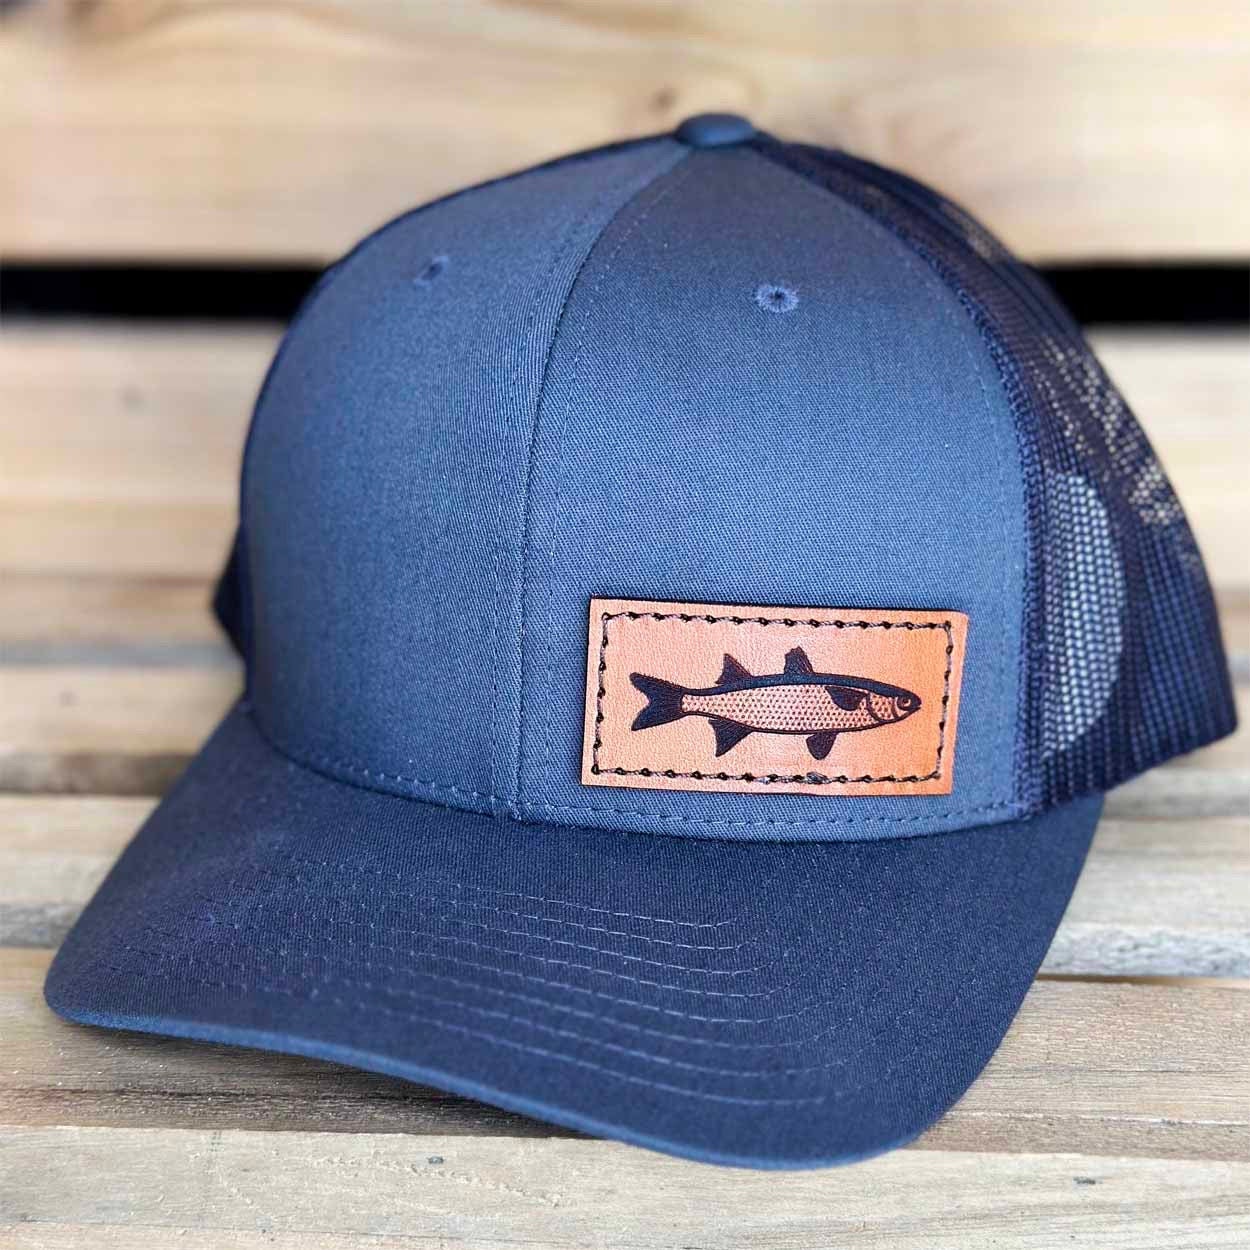 Mullet Flexfit Snapback Trucker Hat Saltwater Fishing, Mullet Run, Flats  Fishing, Offshore Fishing, Leather Patch Hat 